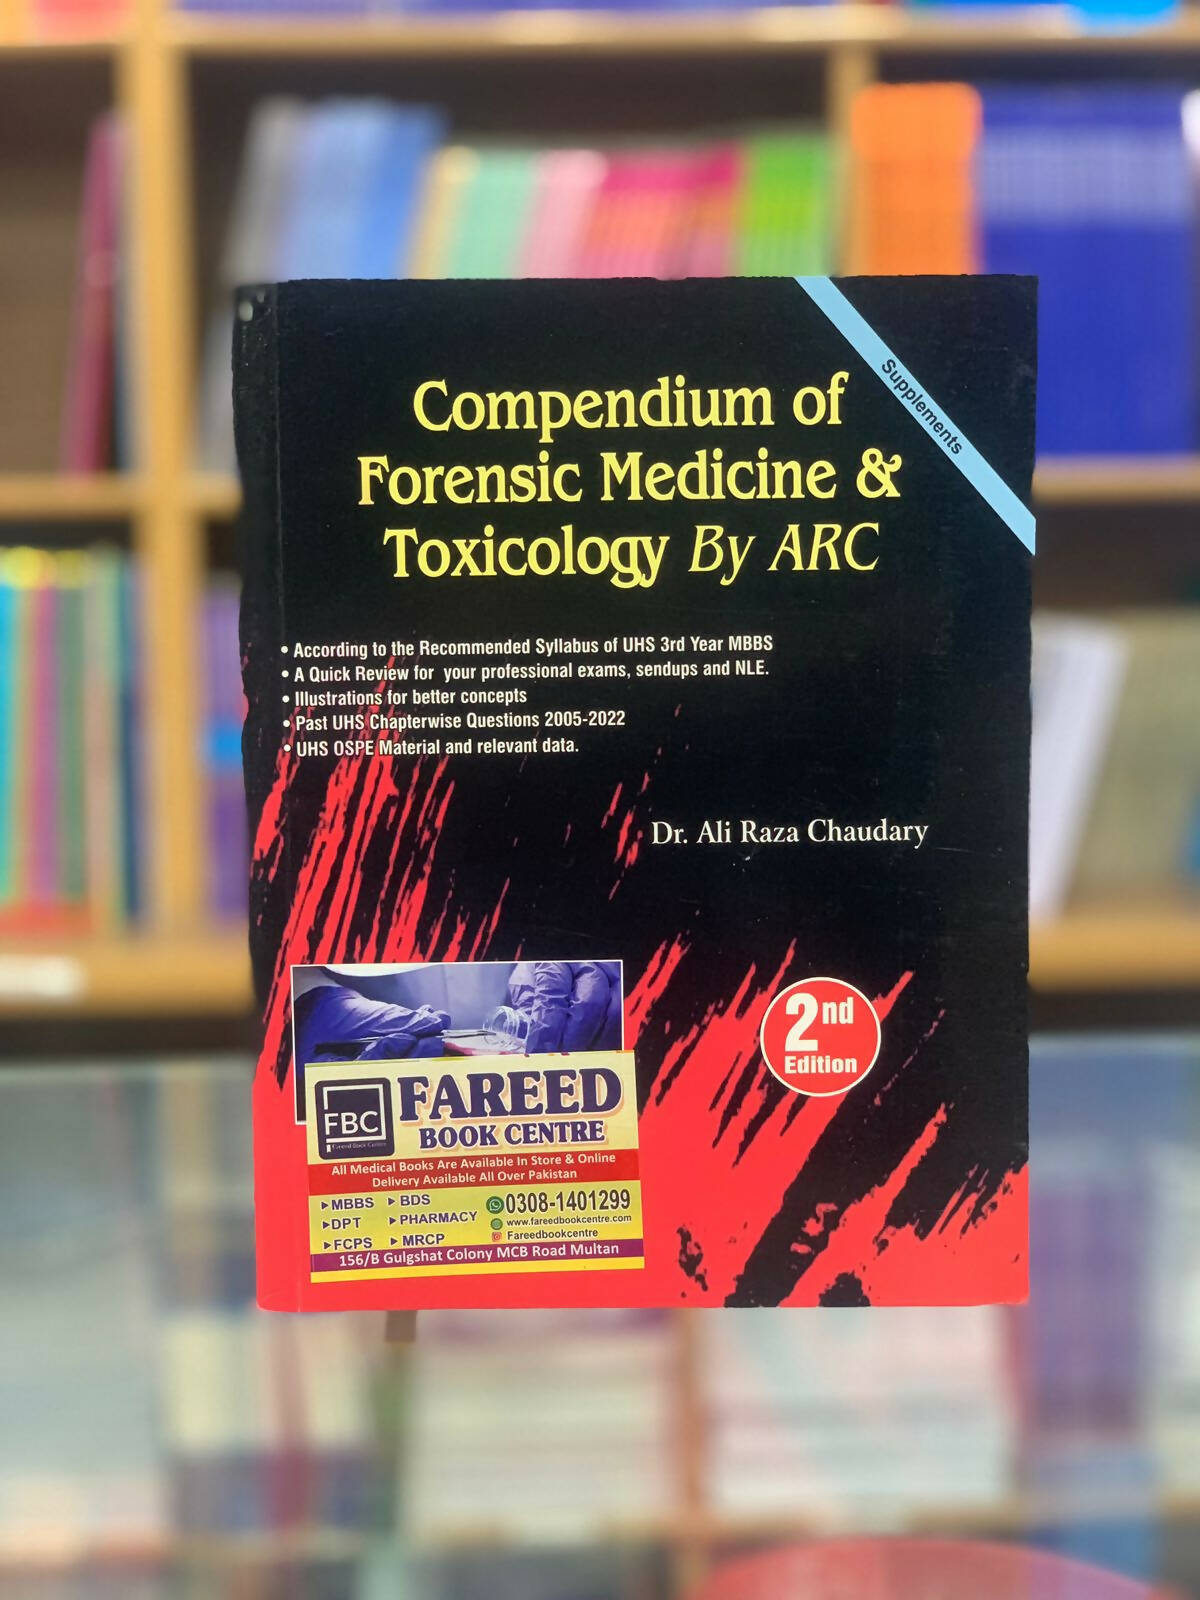 Compendium Of Forensic Medicine & Toxicology By Ali Raza Chaudary 2ND EDITION